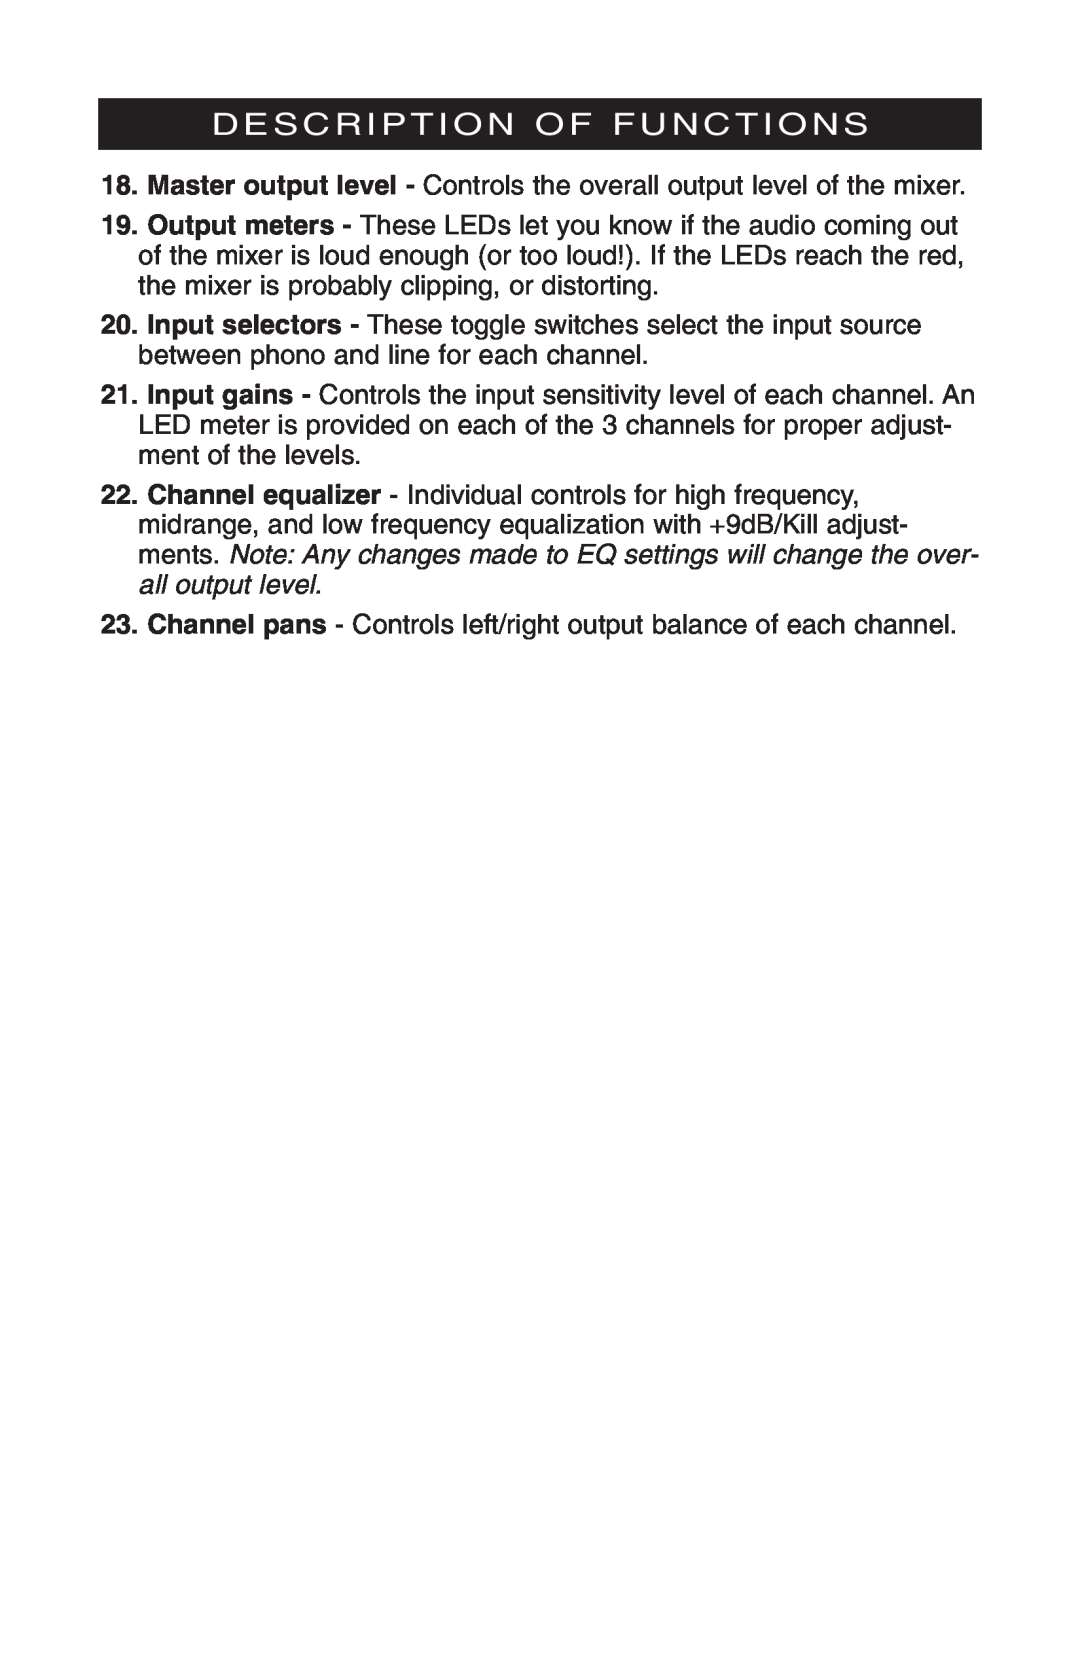 Stanton M304 owner manual Description Of Functions, Channel pans - Controls left/right output balance of each channel 